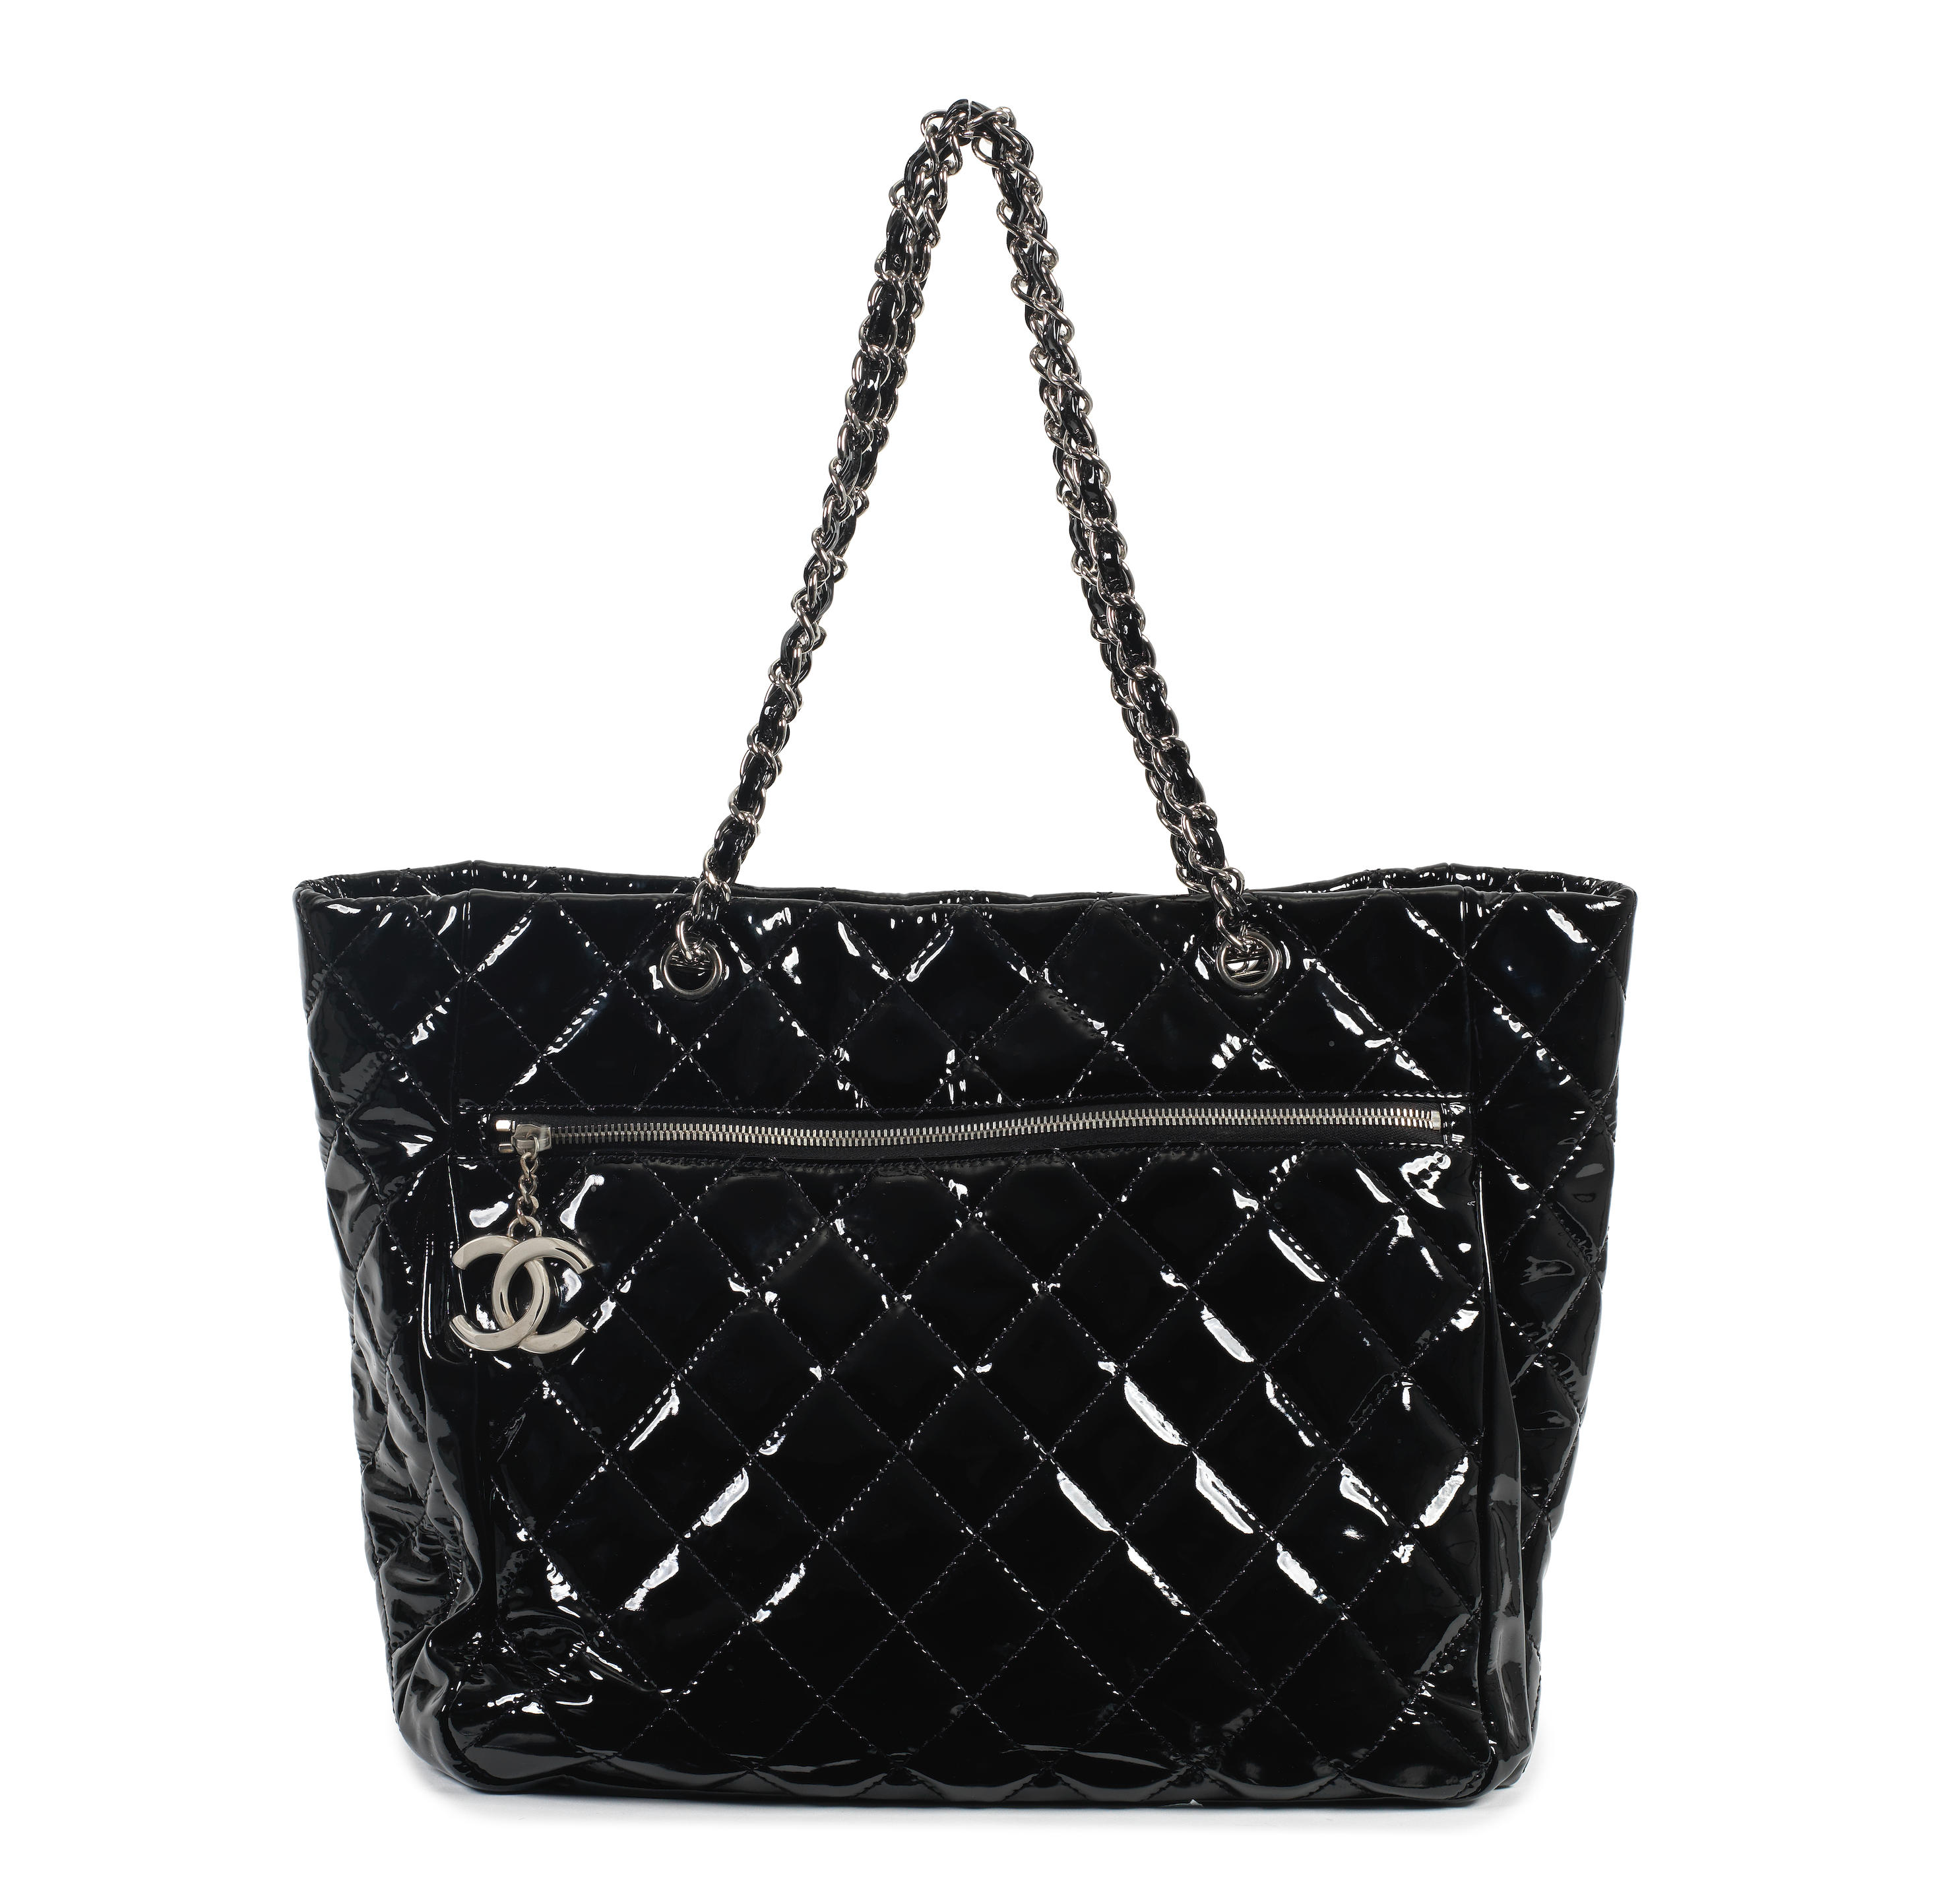 Bonhams : Karl Lagerfeld for Chanel a Black Patent Leather Large Tote Bag  2009-10 (includes serial sticker and dust bag)